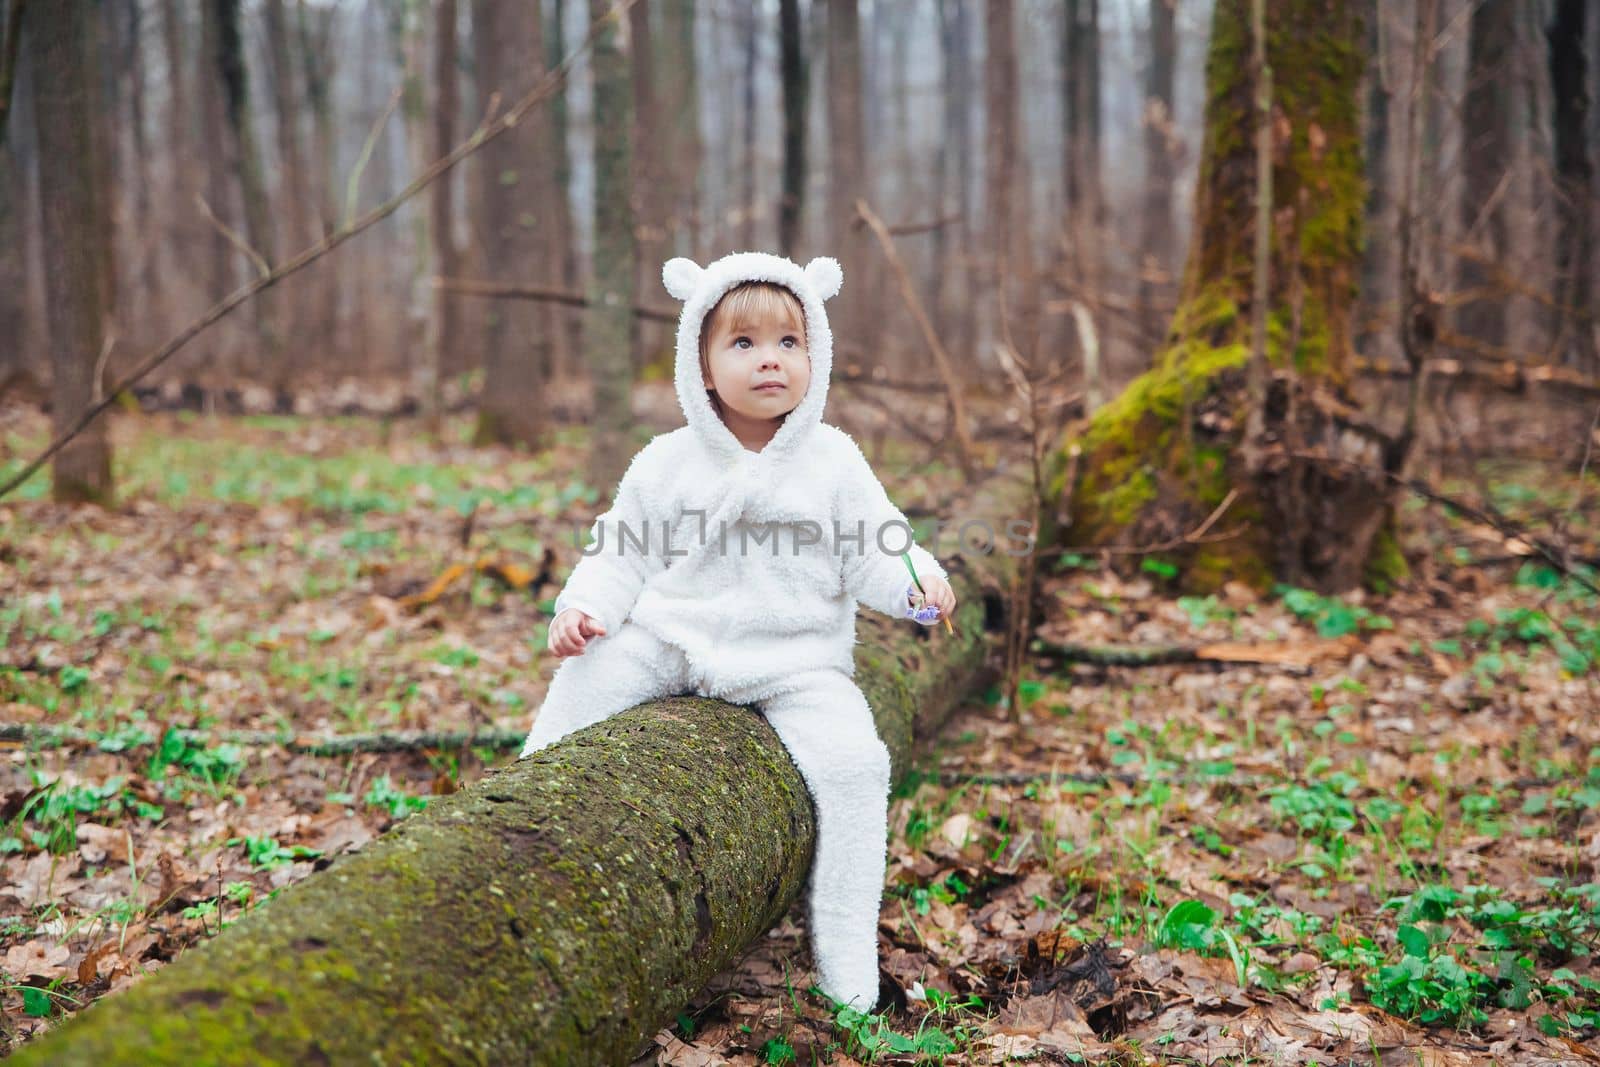 Adorable baby in a bear costume sitting on a fallen tree in the forest.